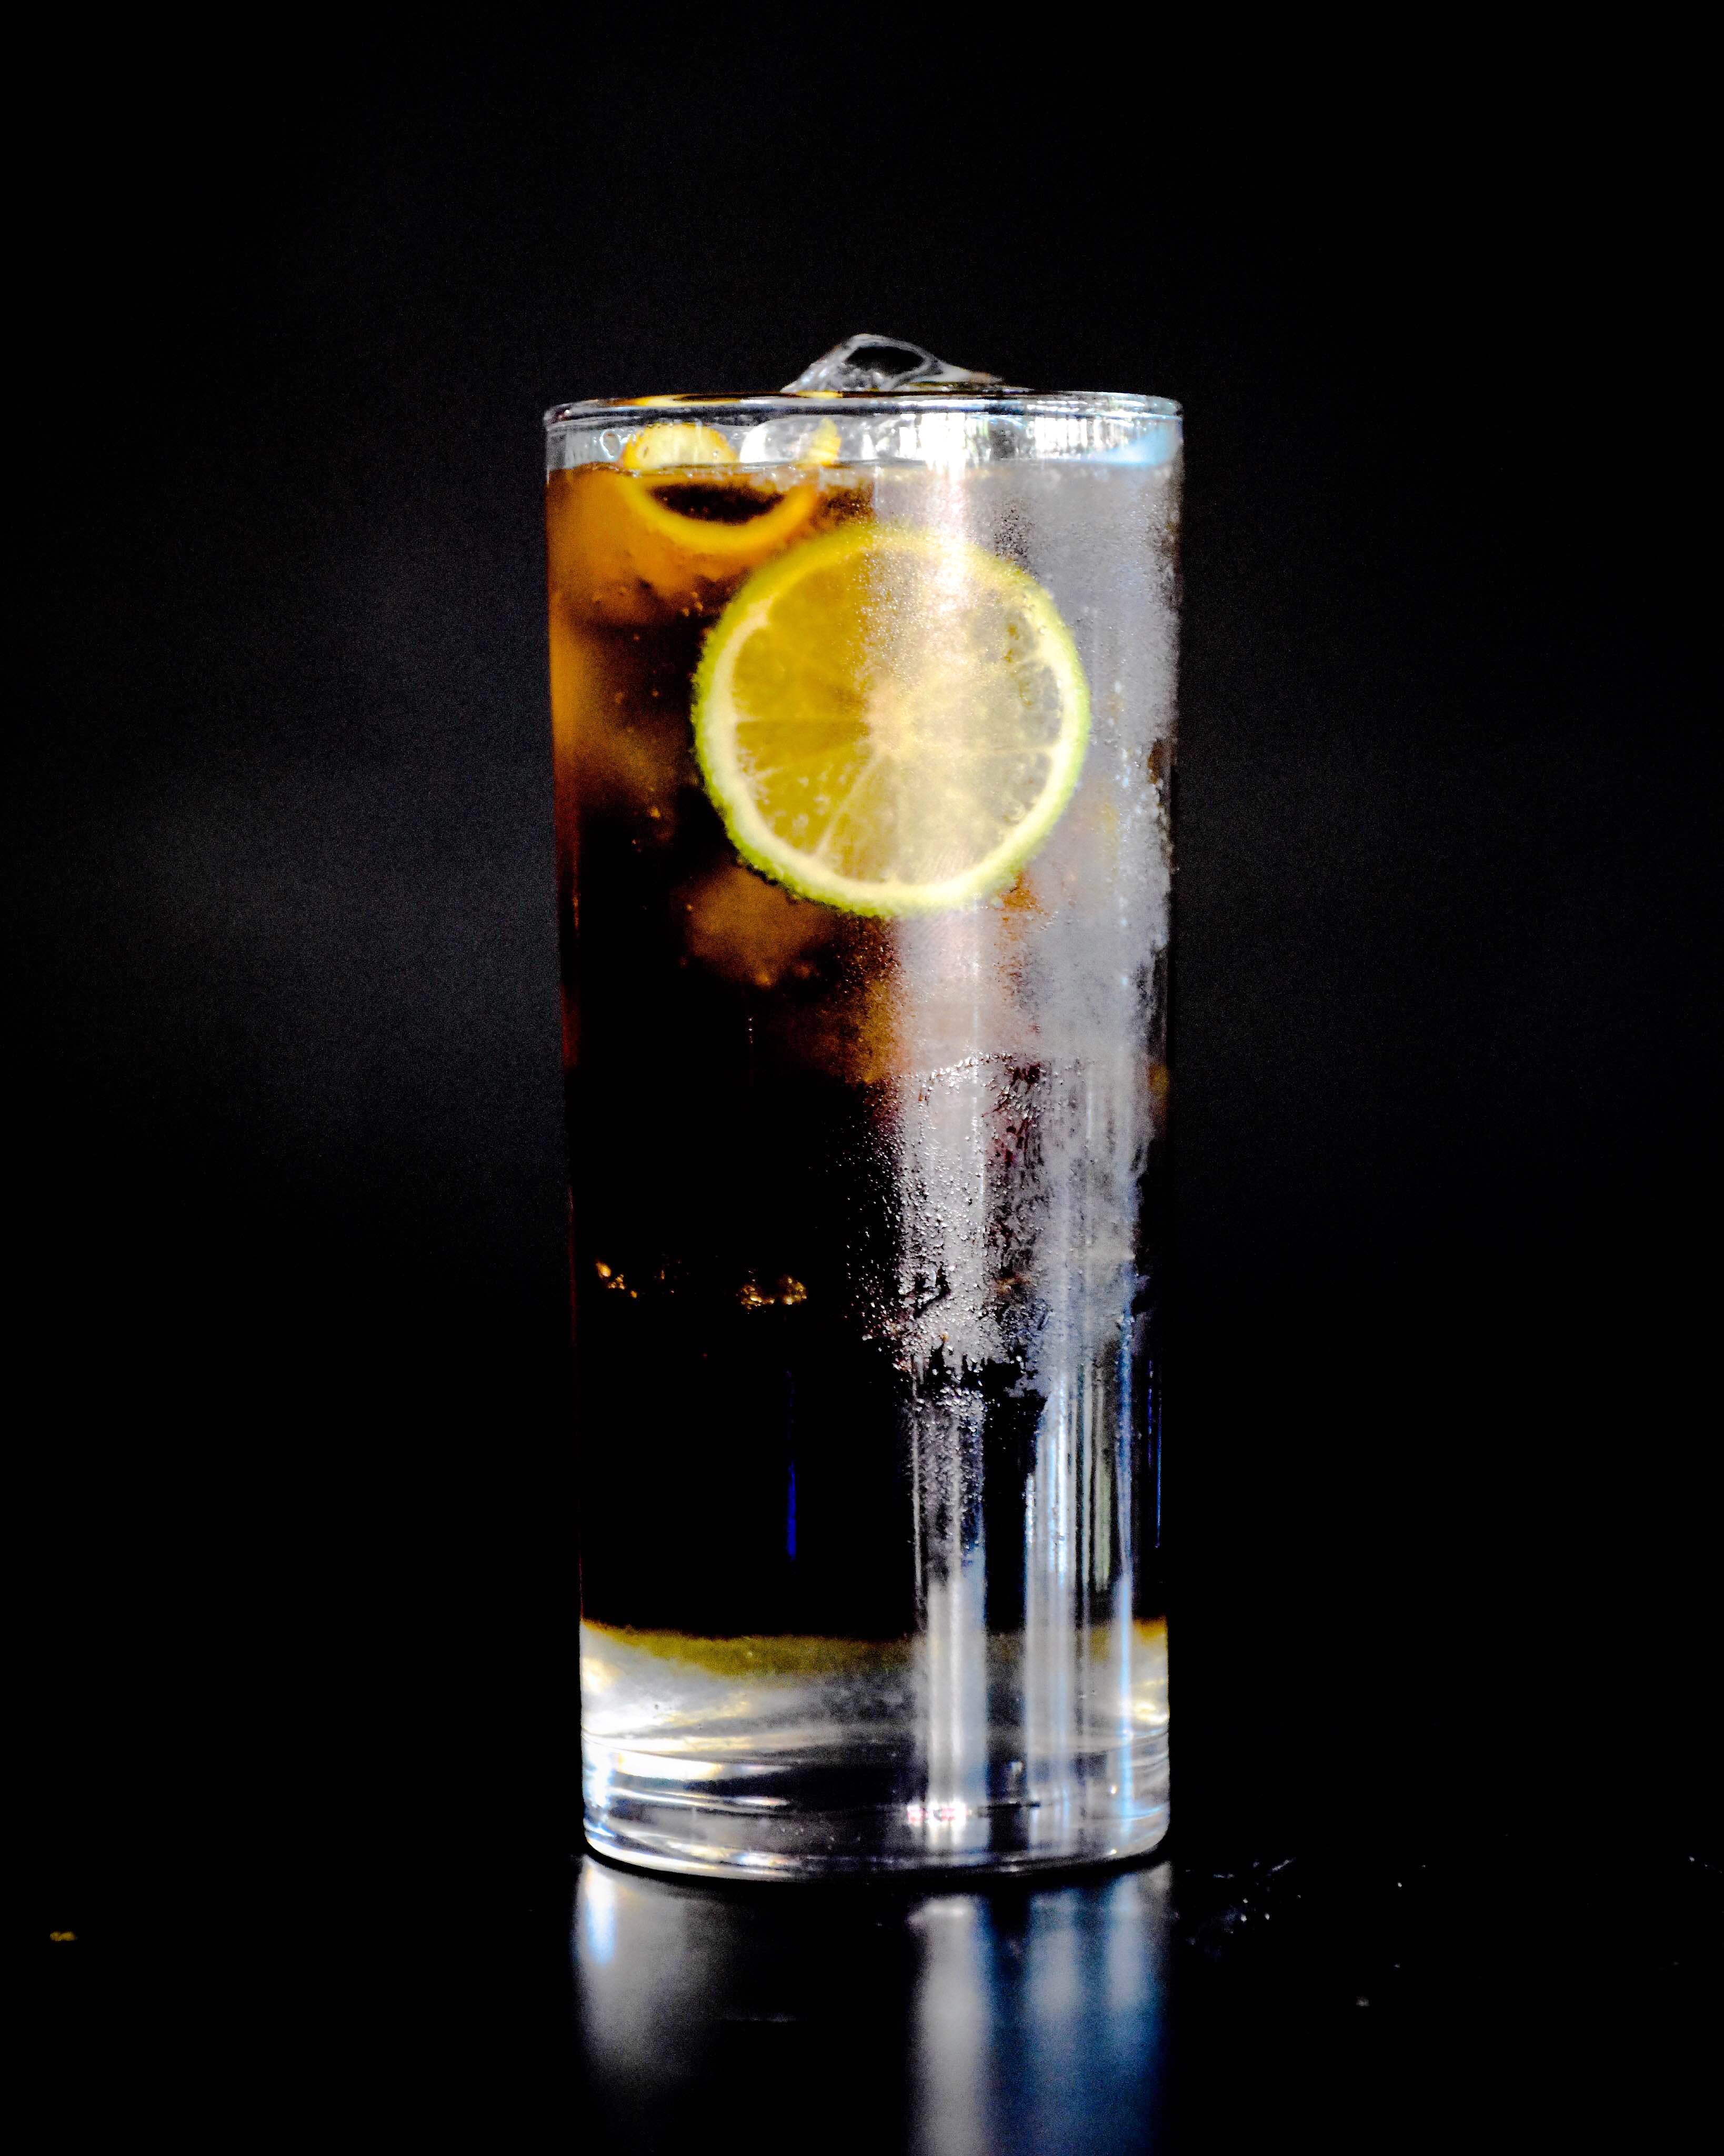 Drink,Highball glass,Alcoholic beverage,Distilled beverage,Highball,Sour,Old fashioned glass,Fizz,Gin and tonic,Beer cocktail